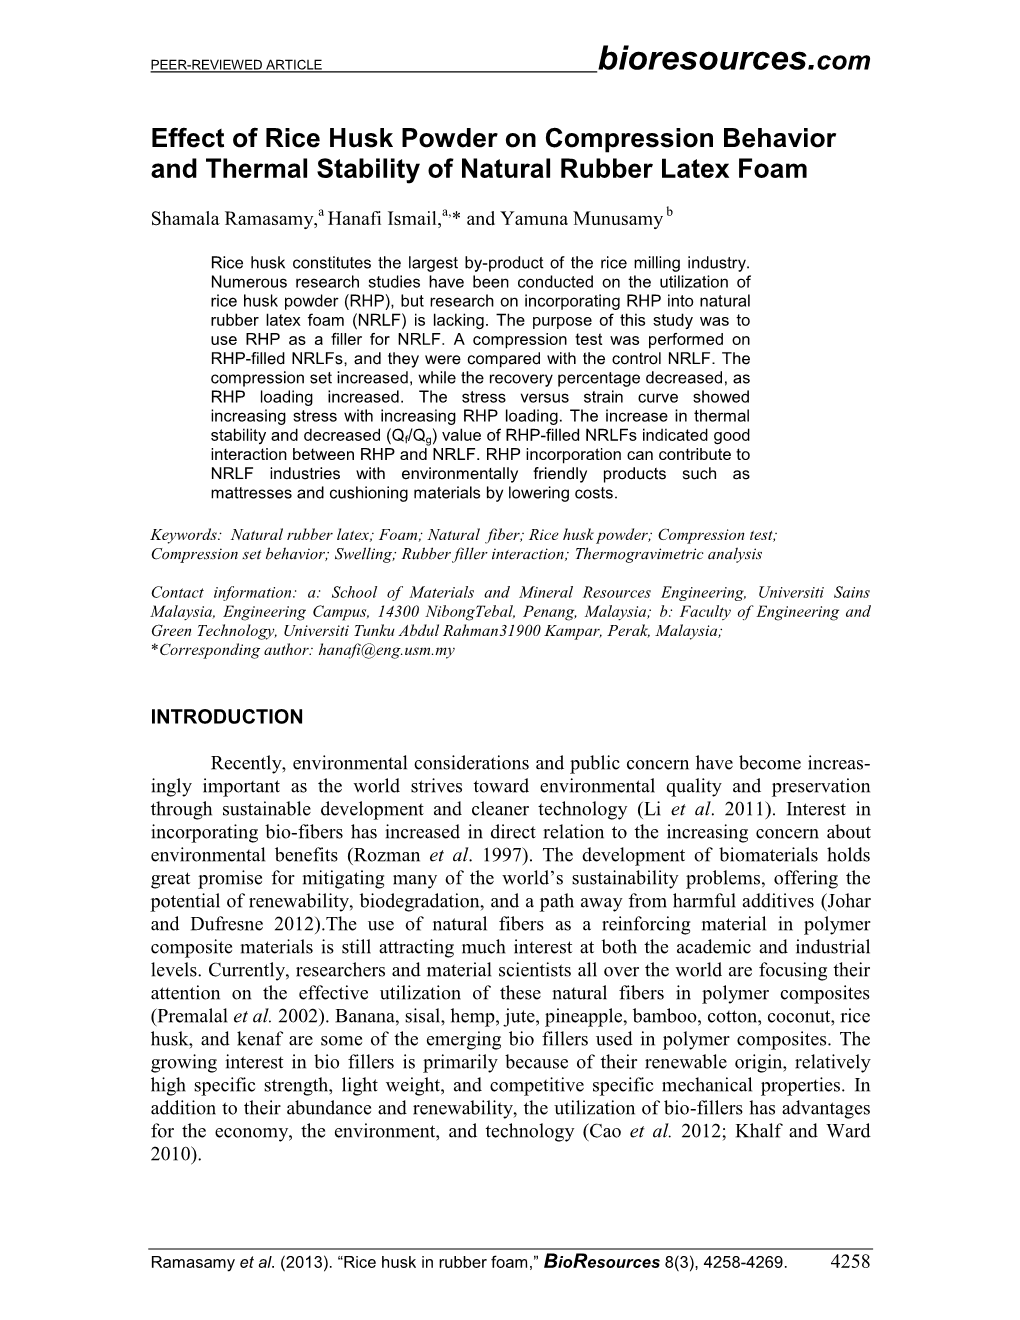 Effect of Rice Husk Powder on Compression Behavior and Thermal Stability of Natural Rubber Latex Foam